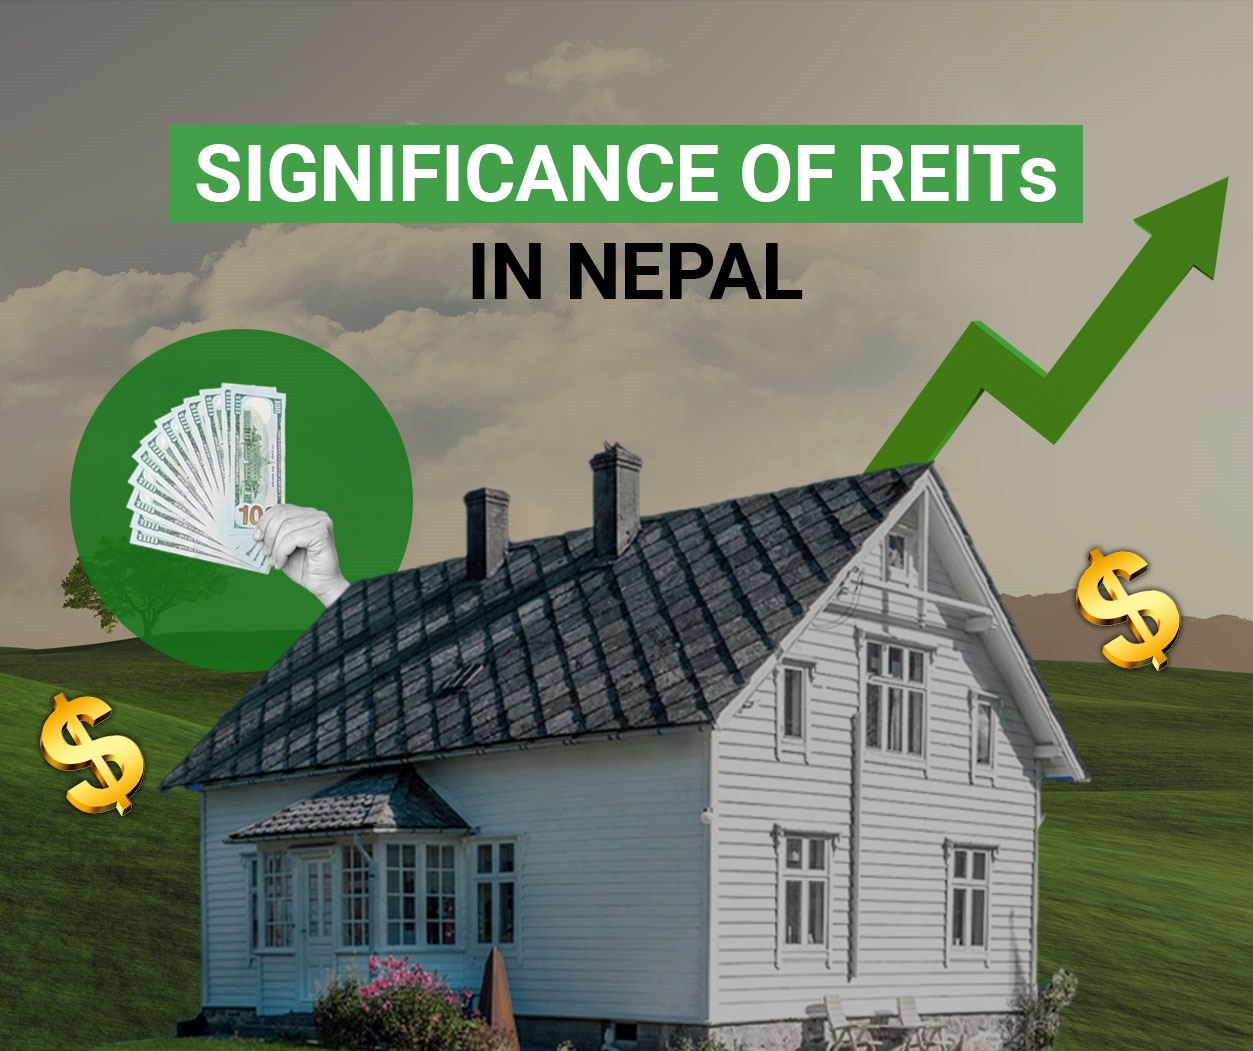 Significance of REITs in Nepal